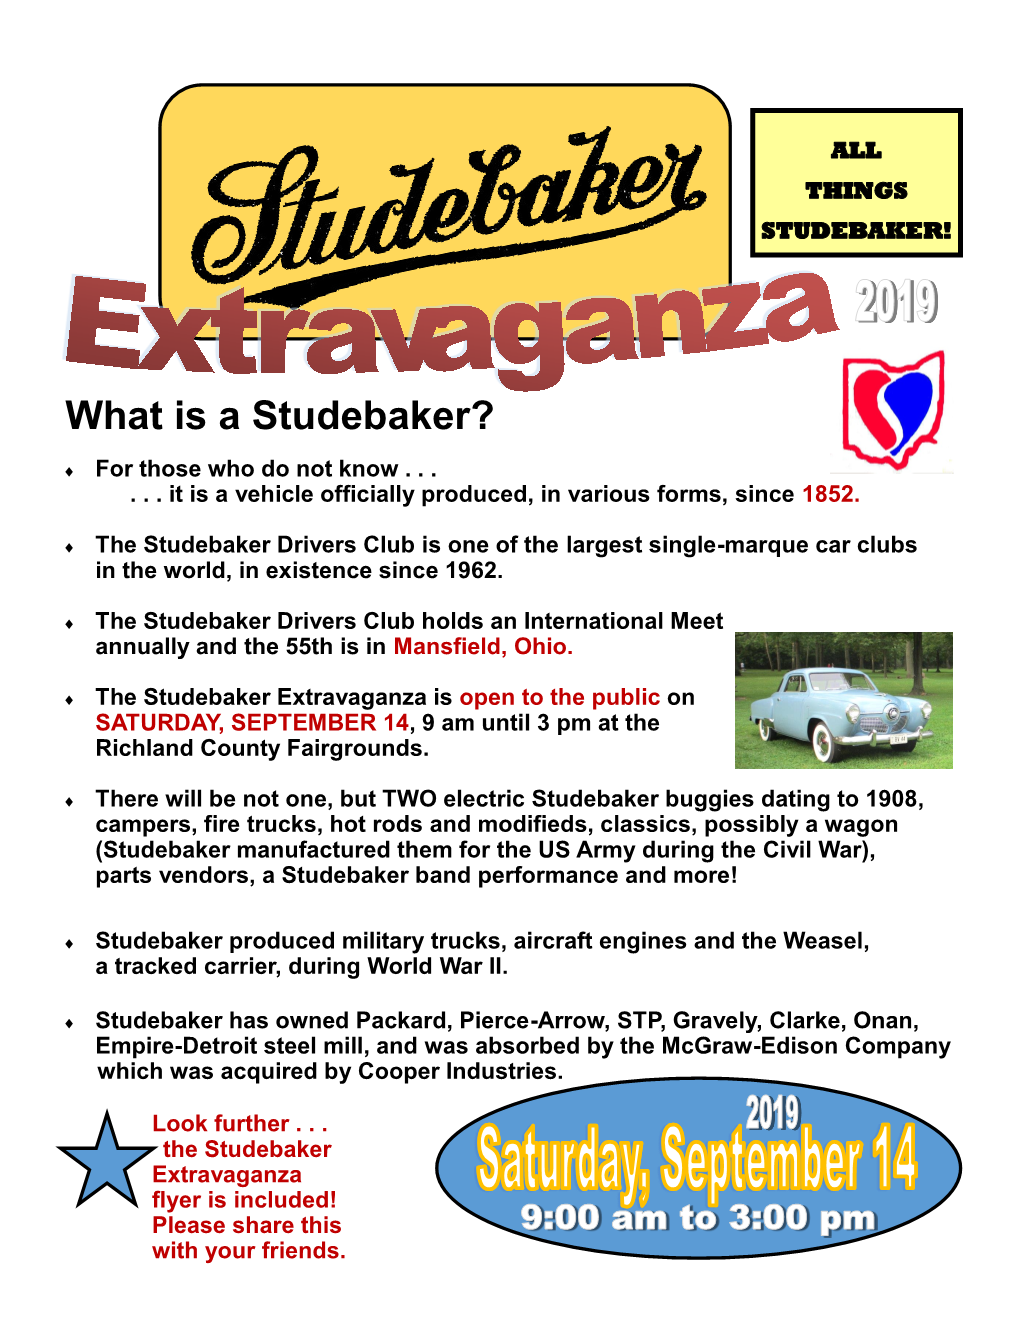 What Is a Studebaker?